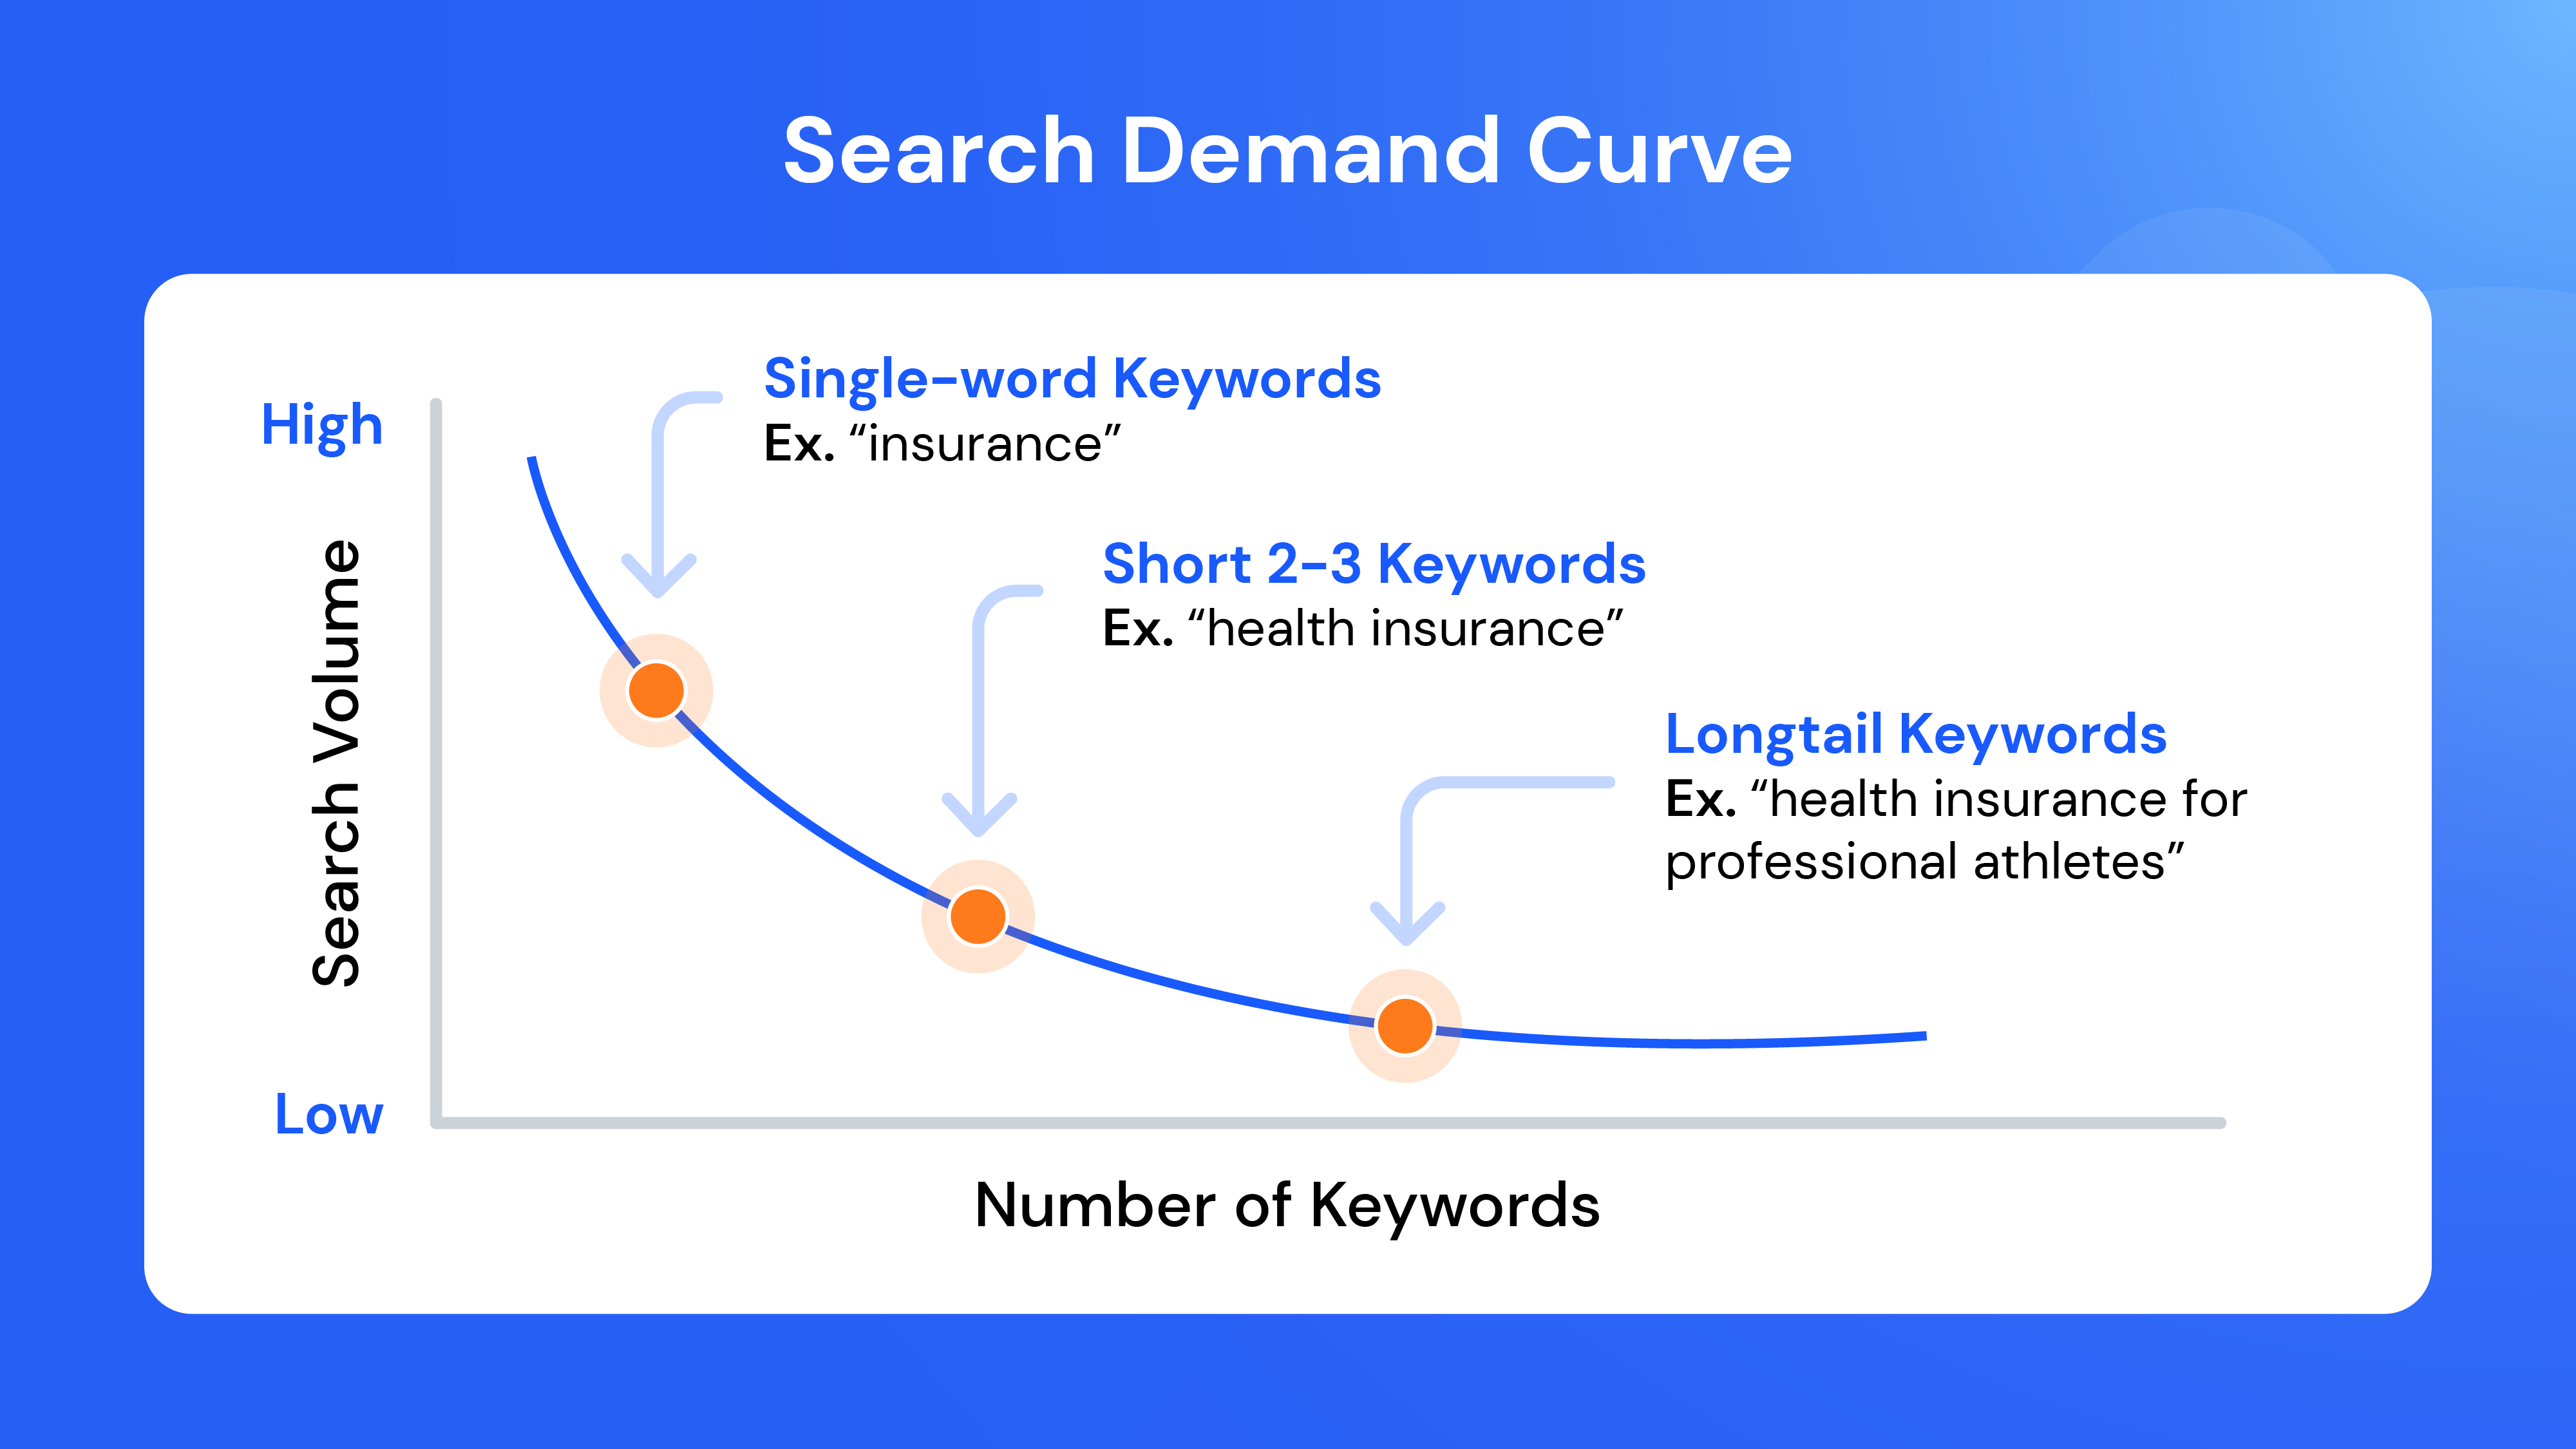 Search demand curve with keyword examples